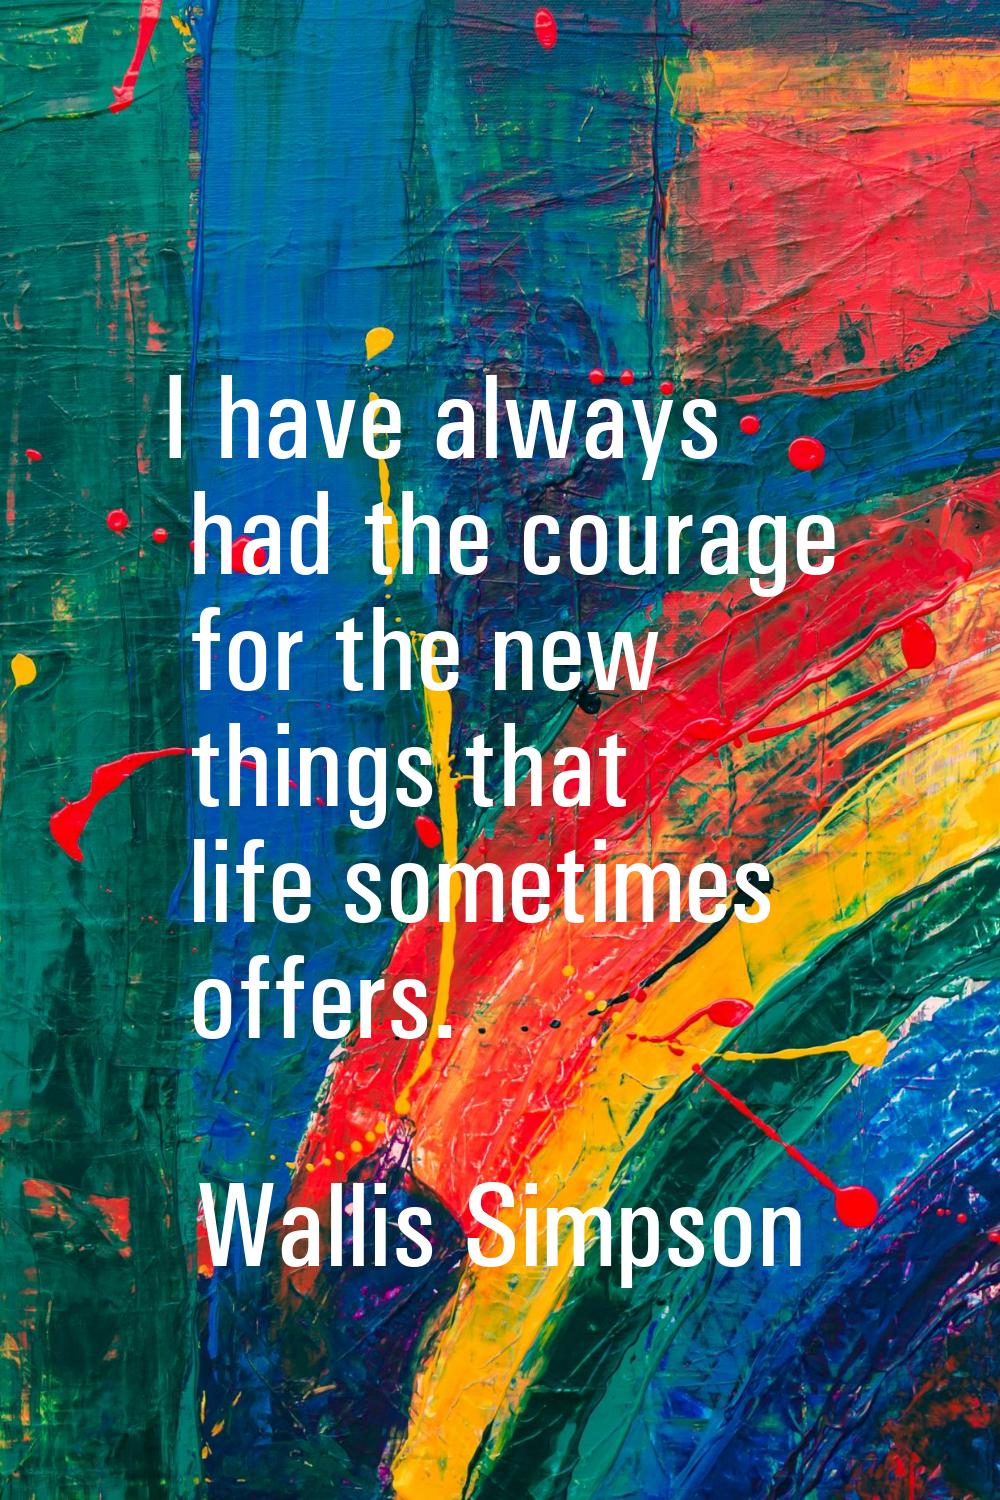 I have always had the courage for the new things that life sometimes offers.